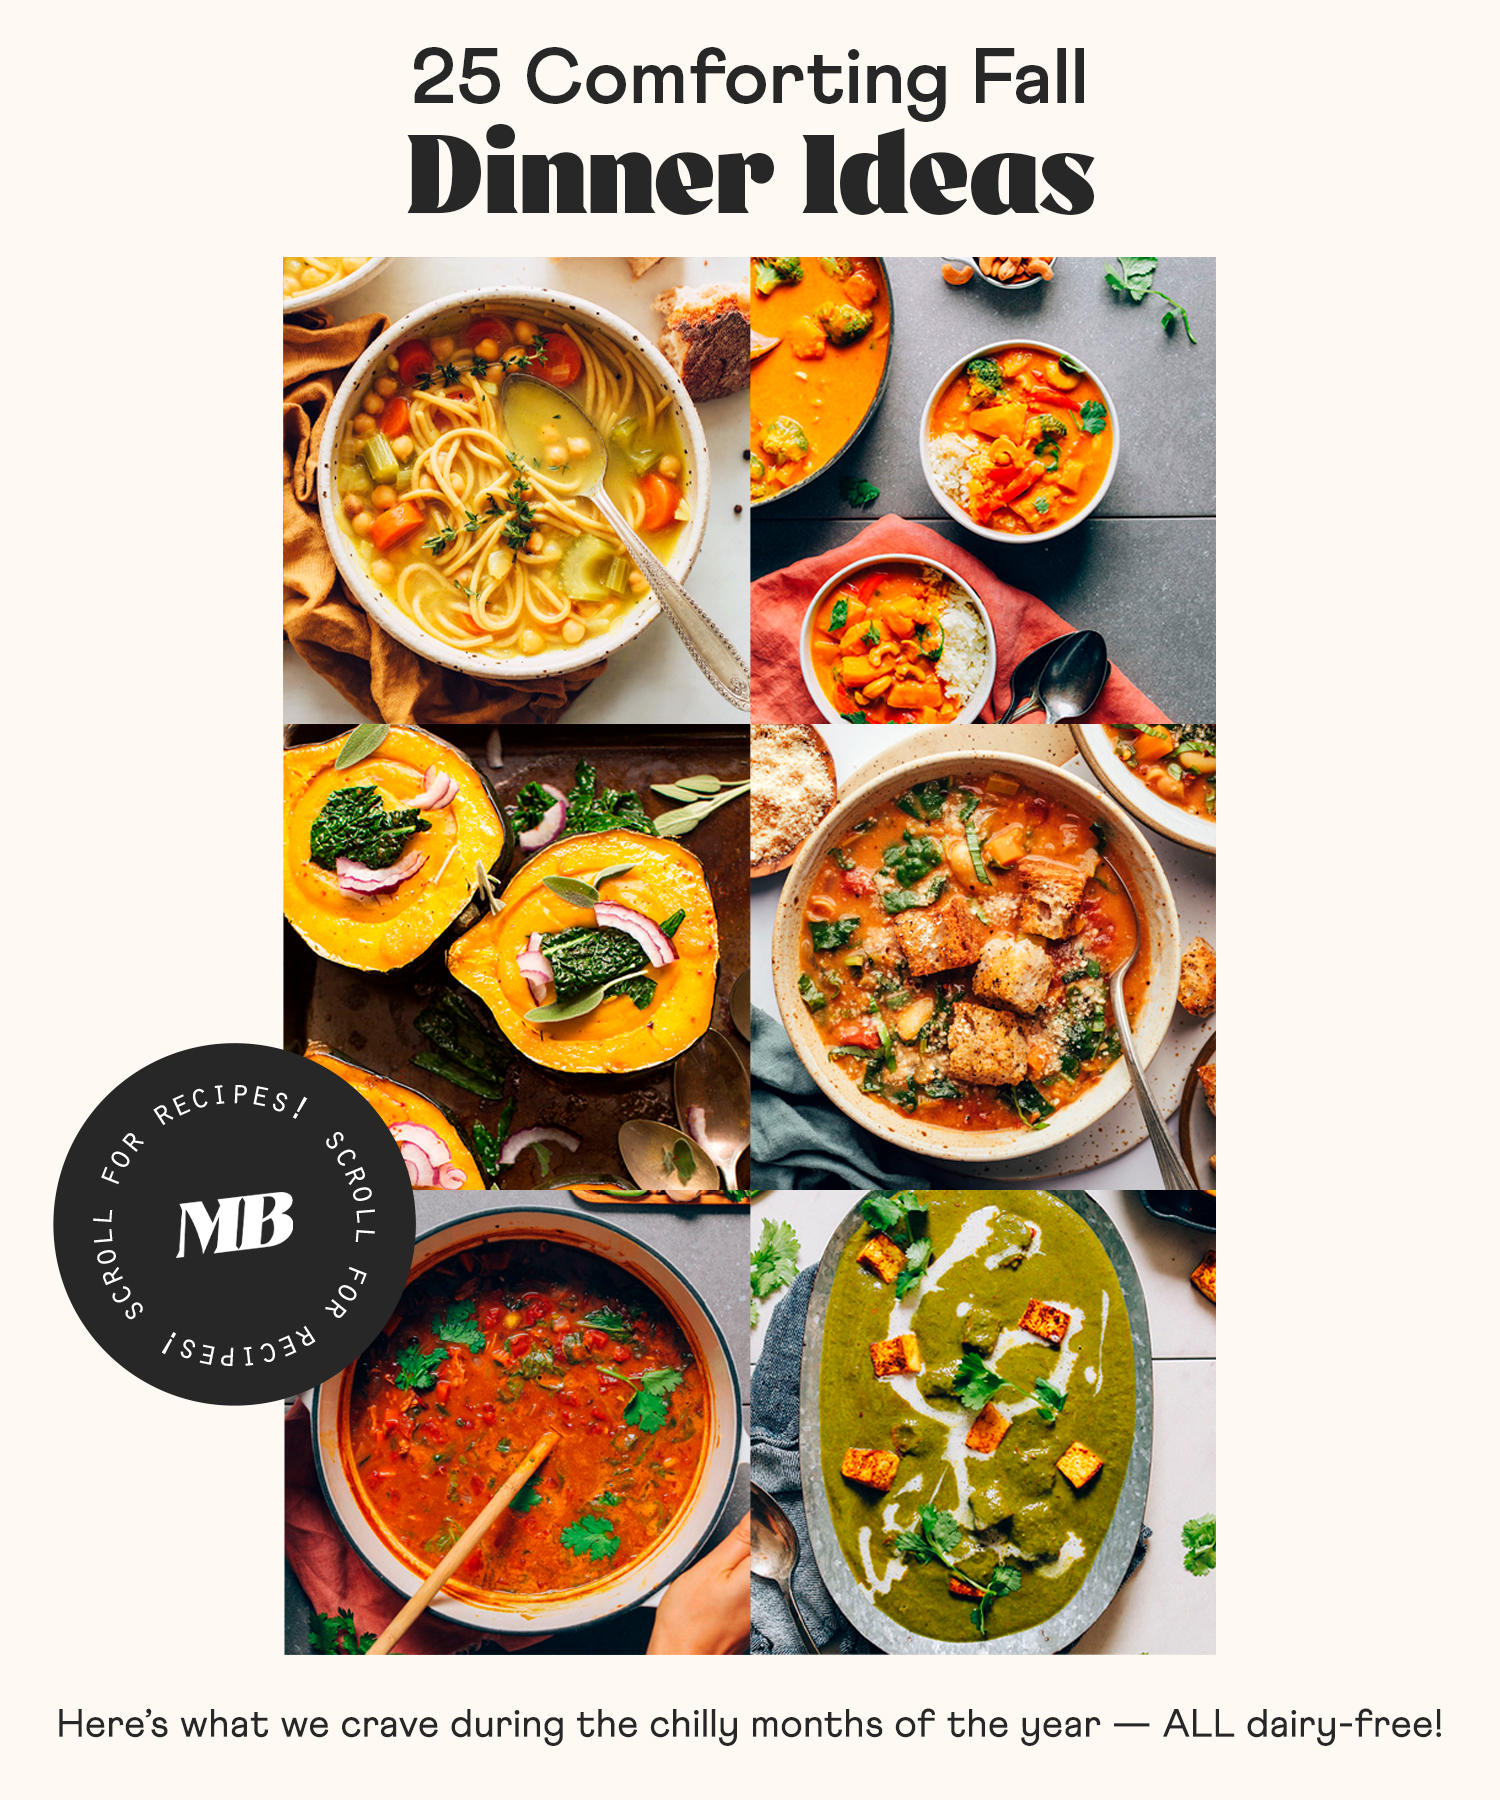 Soups, curries, and more comforting dairy-free fall dinner ideas